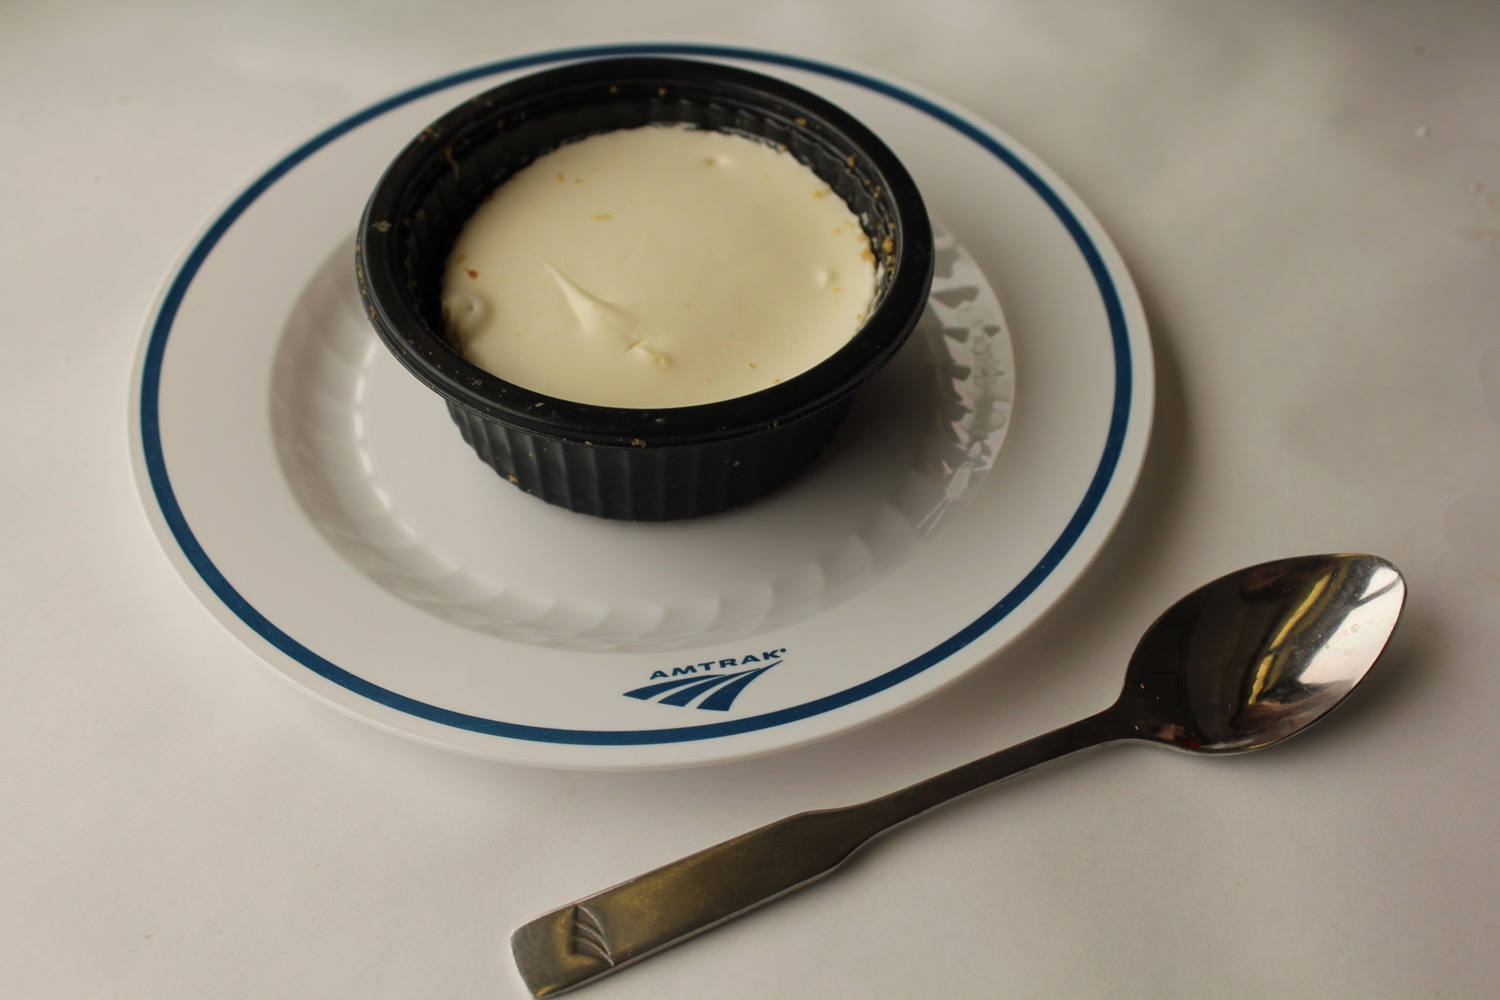 a plate with a white food on it and a spoon